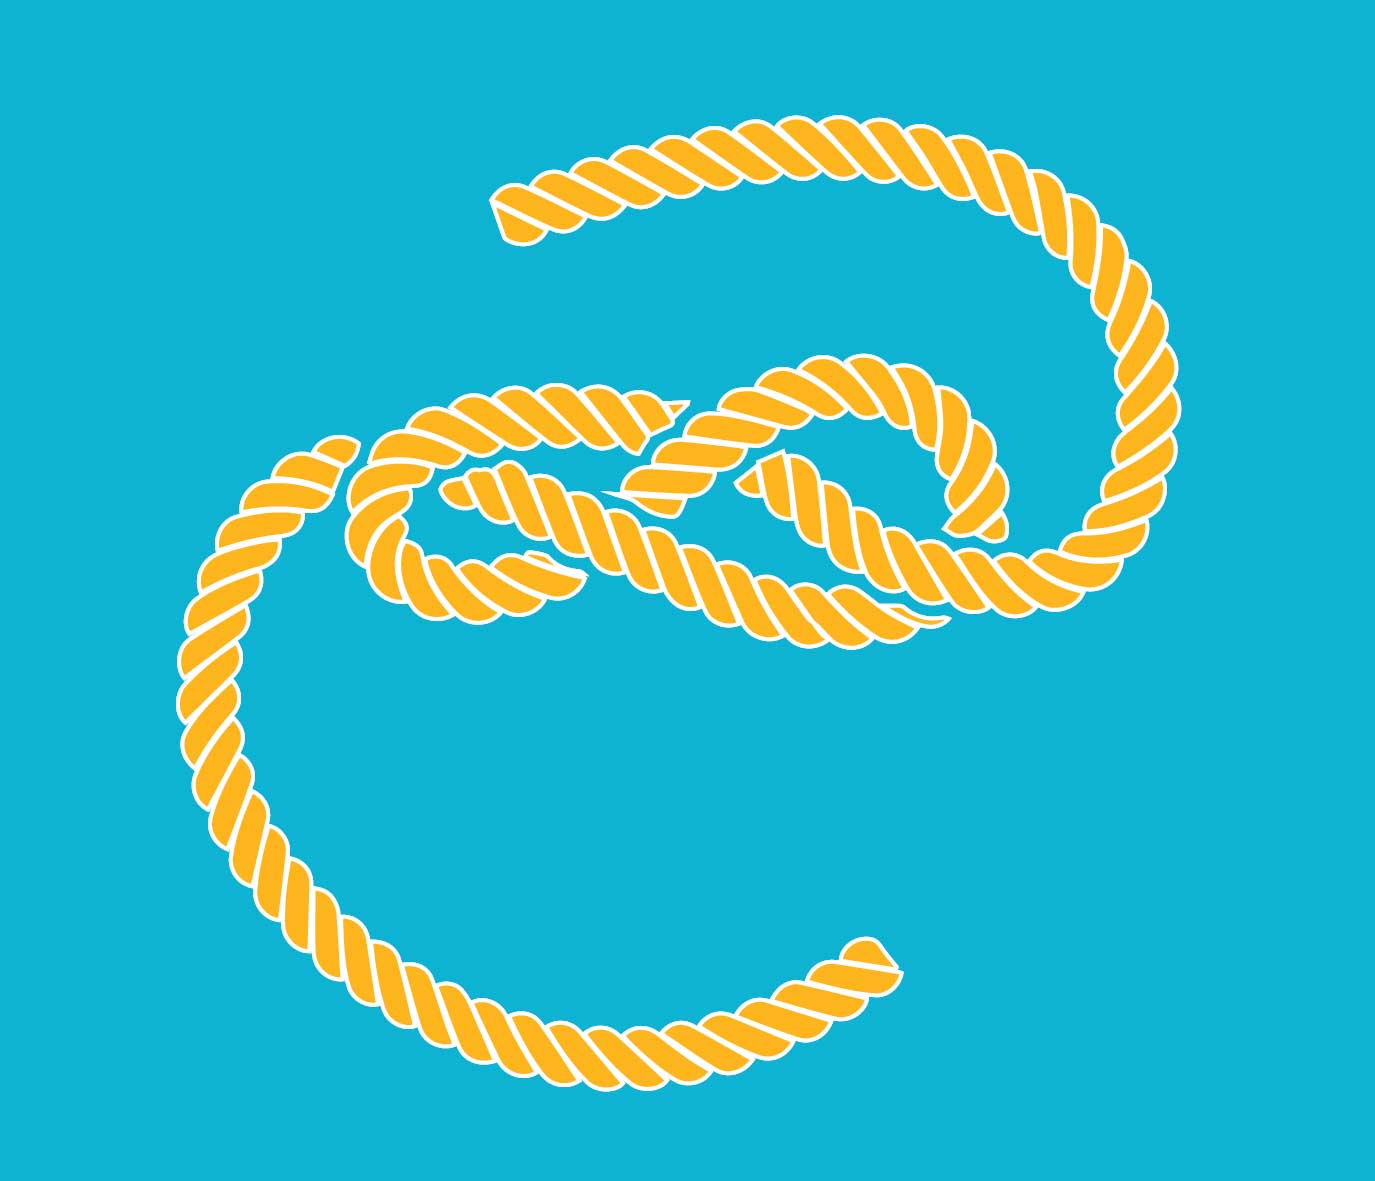 Illustration of a thick yellow rope.